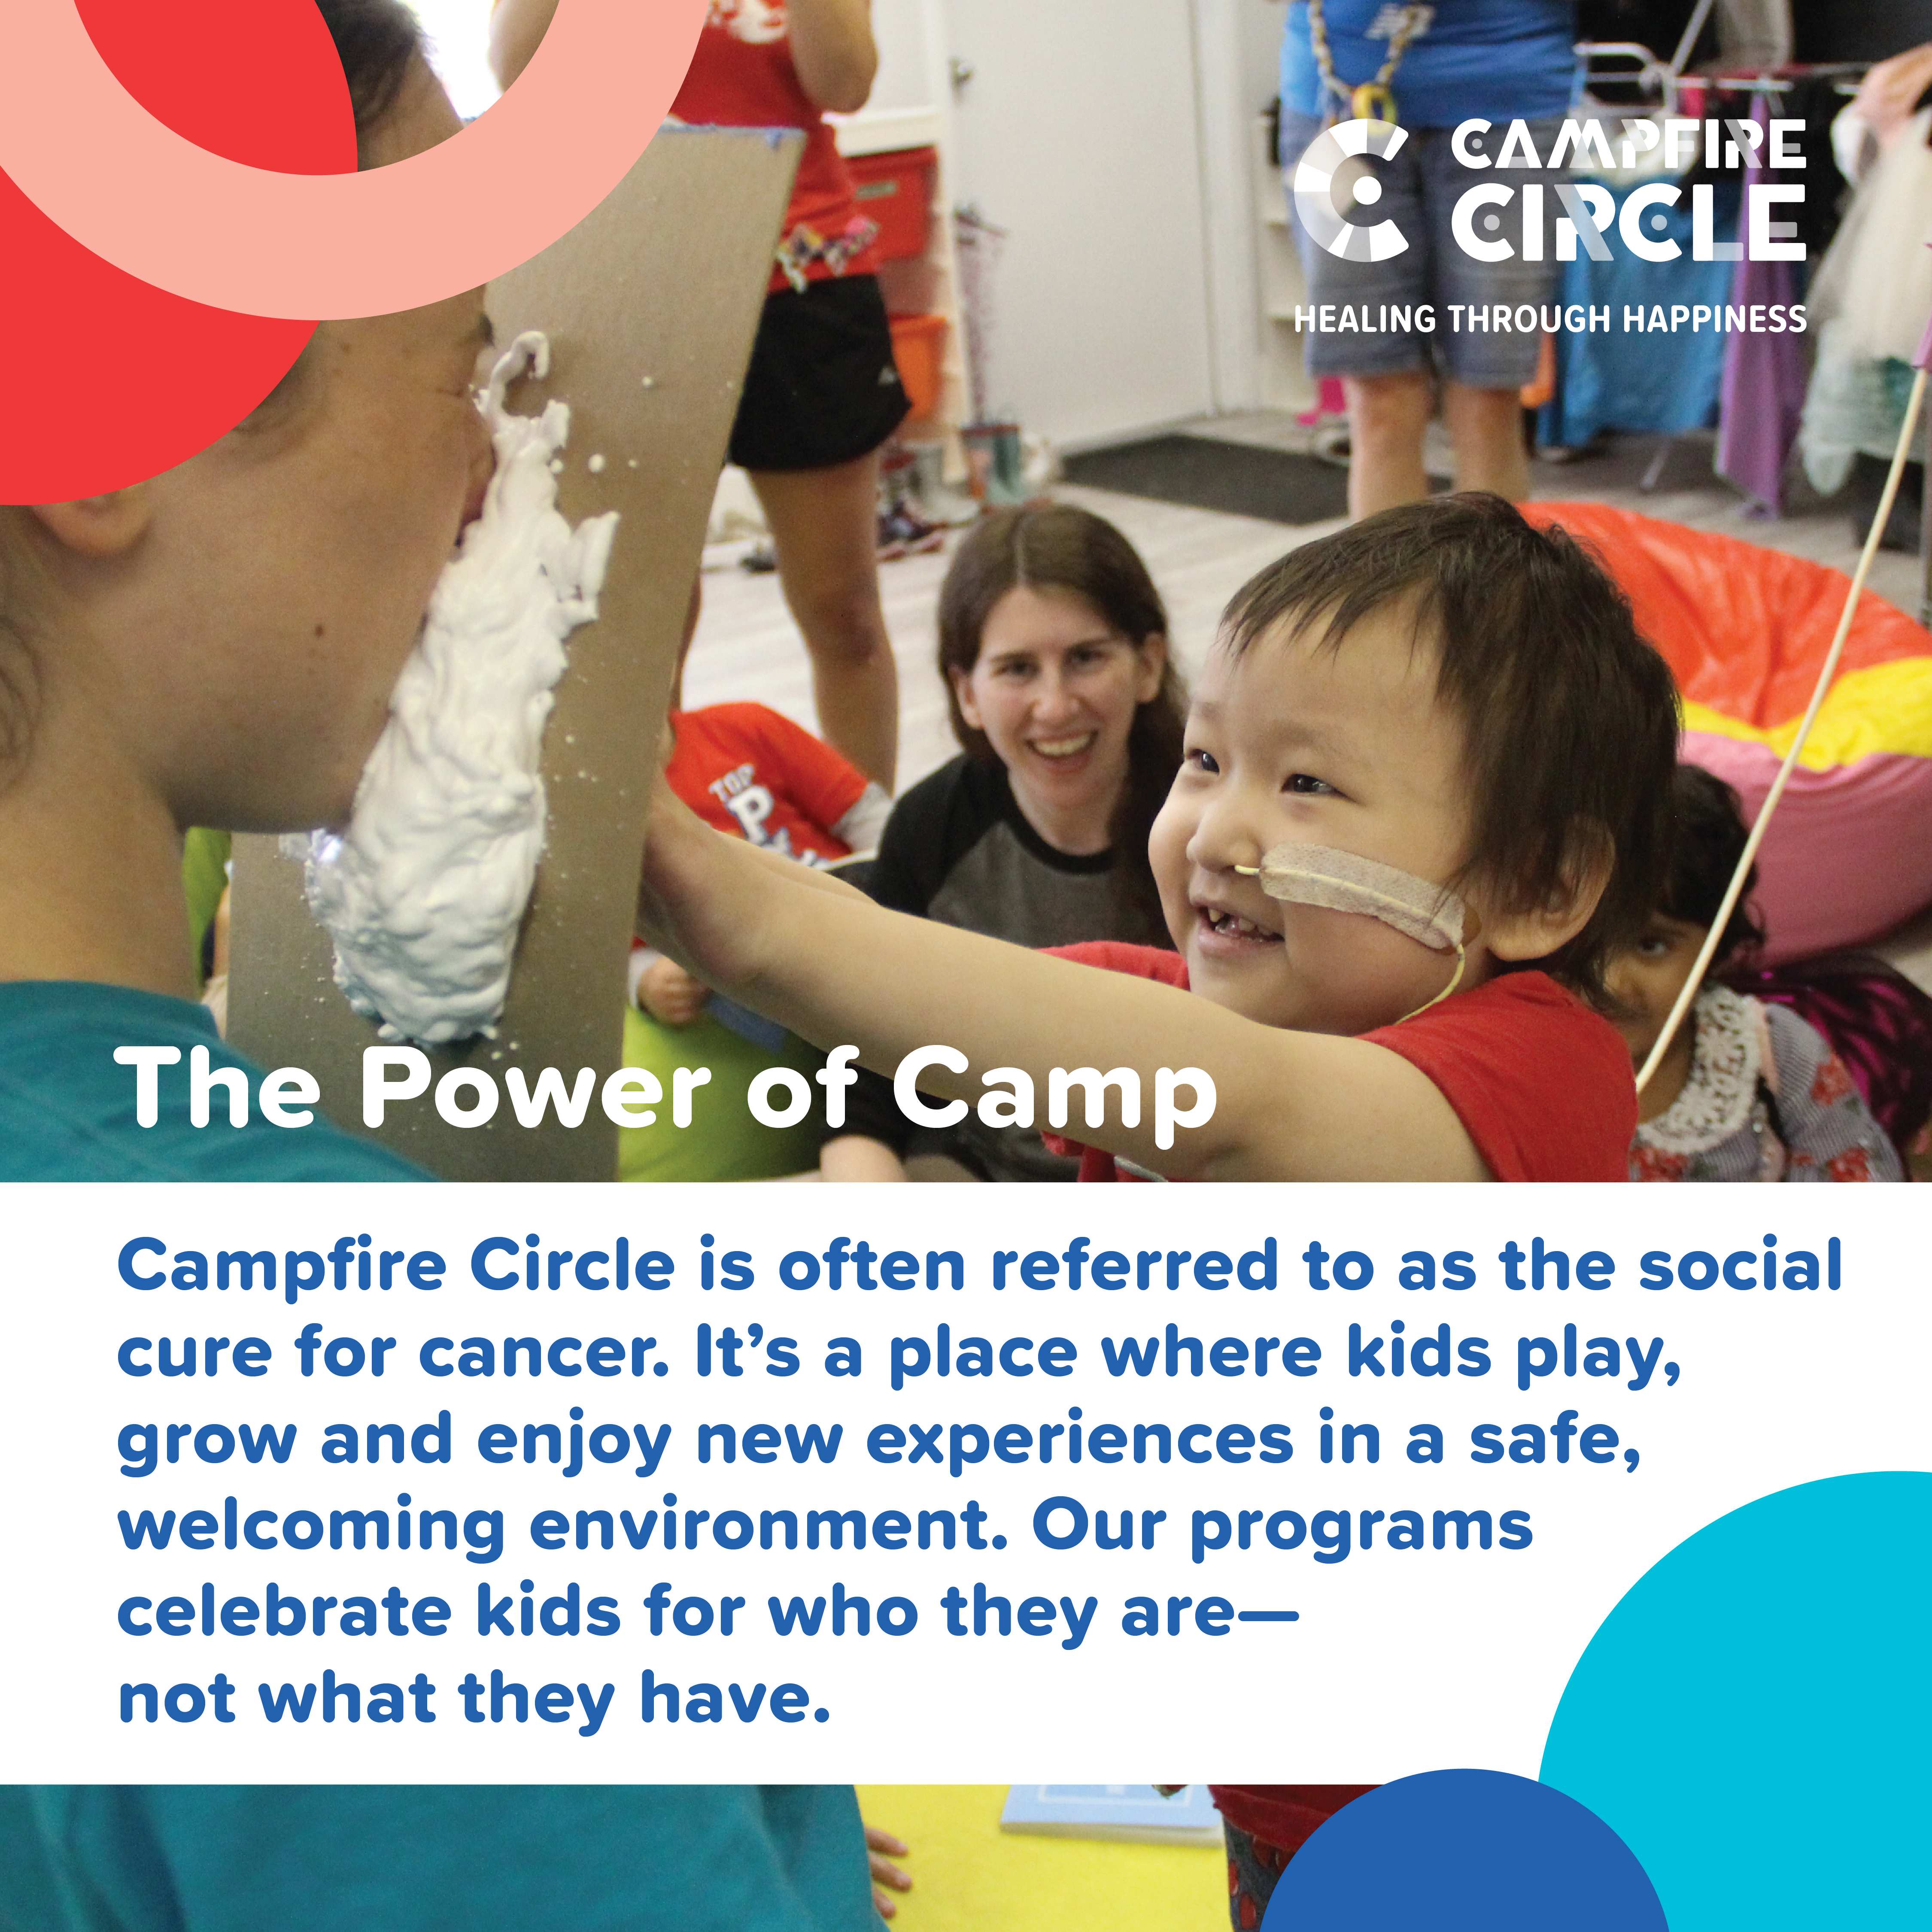 The Power of Camp. Campfire Circle is often referred to as the social cure for cancer. It's a place where kids play, grow and enjoy new experiences in a safe, welcoming environment. Our programs celebrate kids for who they are - not what they have.